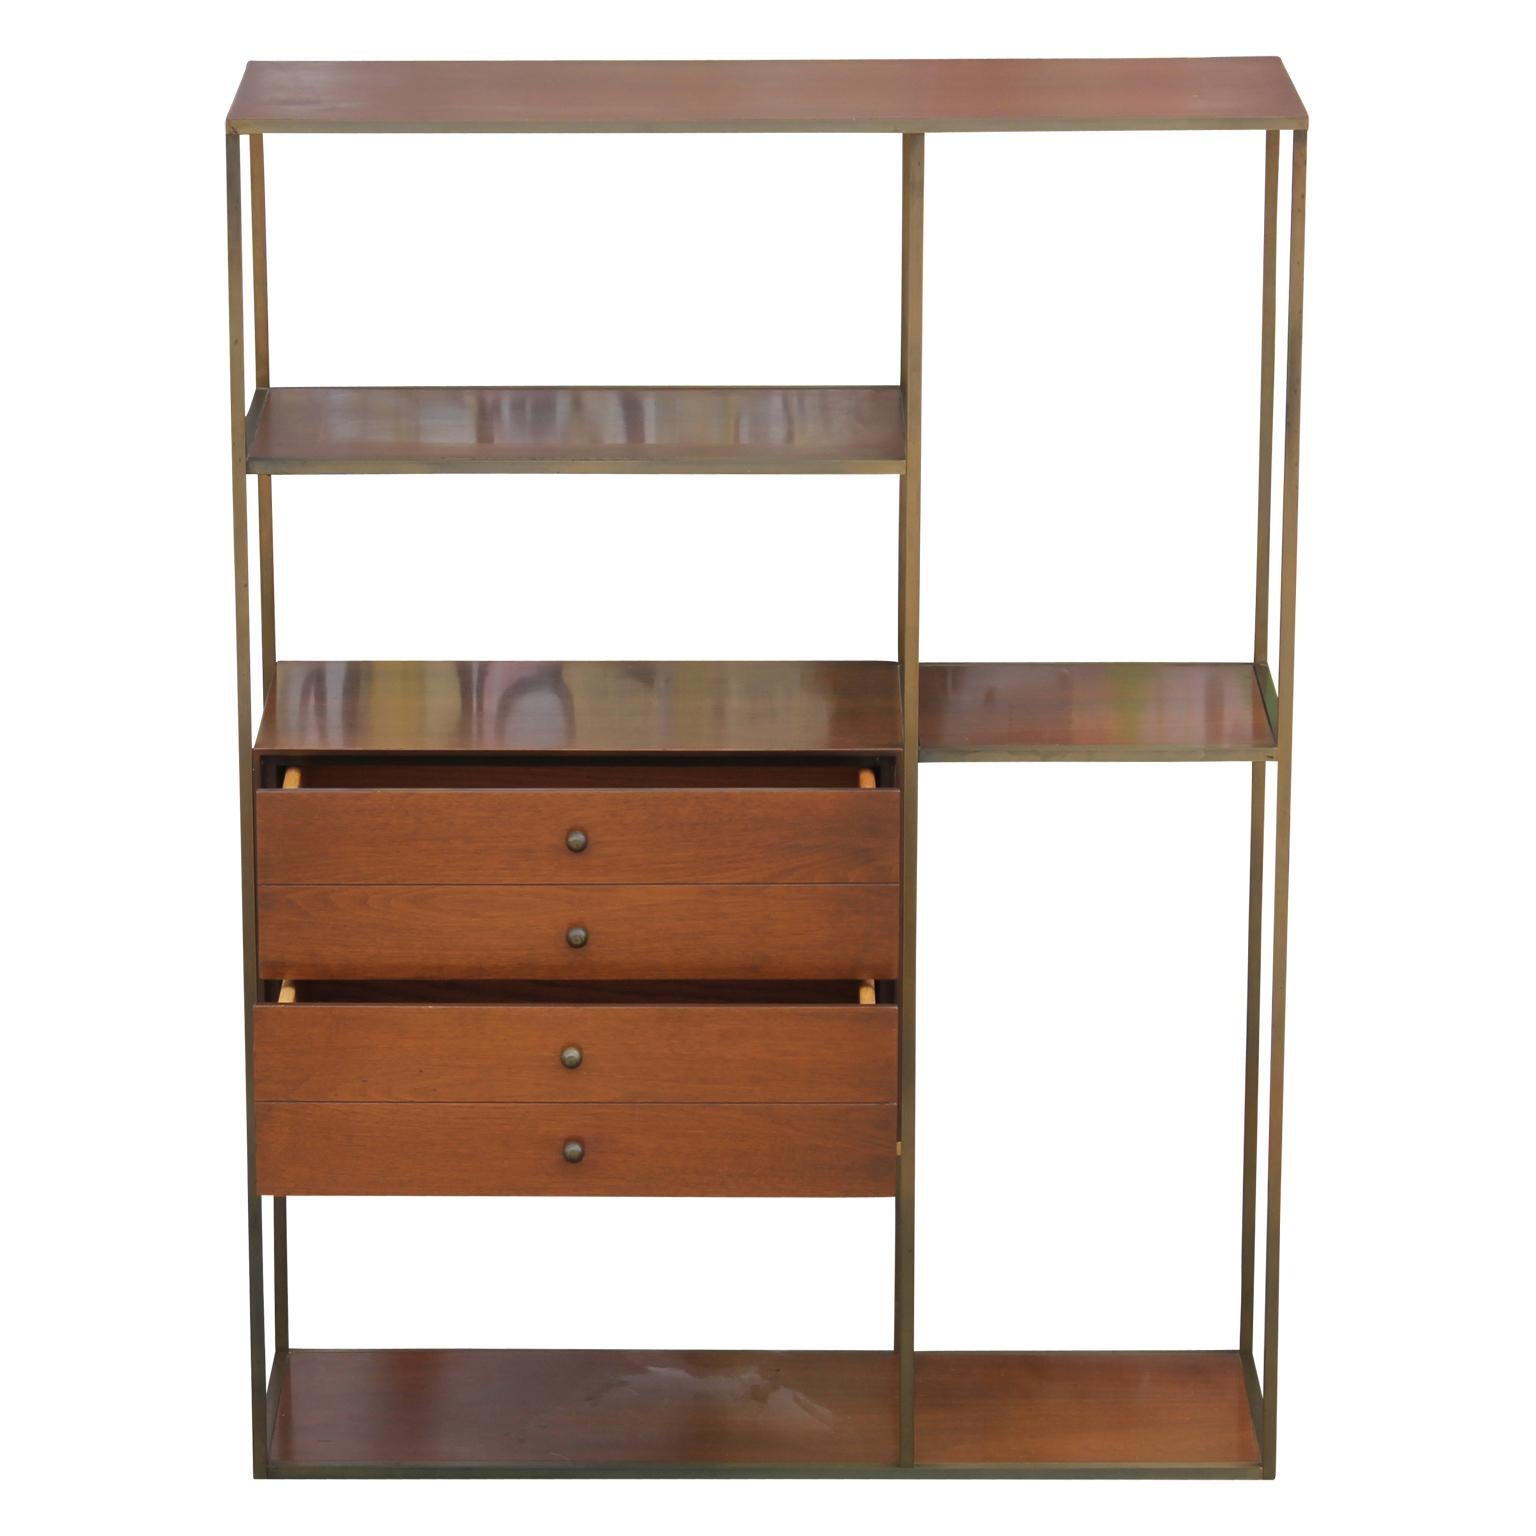 American Modern Brass and Walnut Calvin Bookcase or Room Divider by Paul McCobb